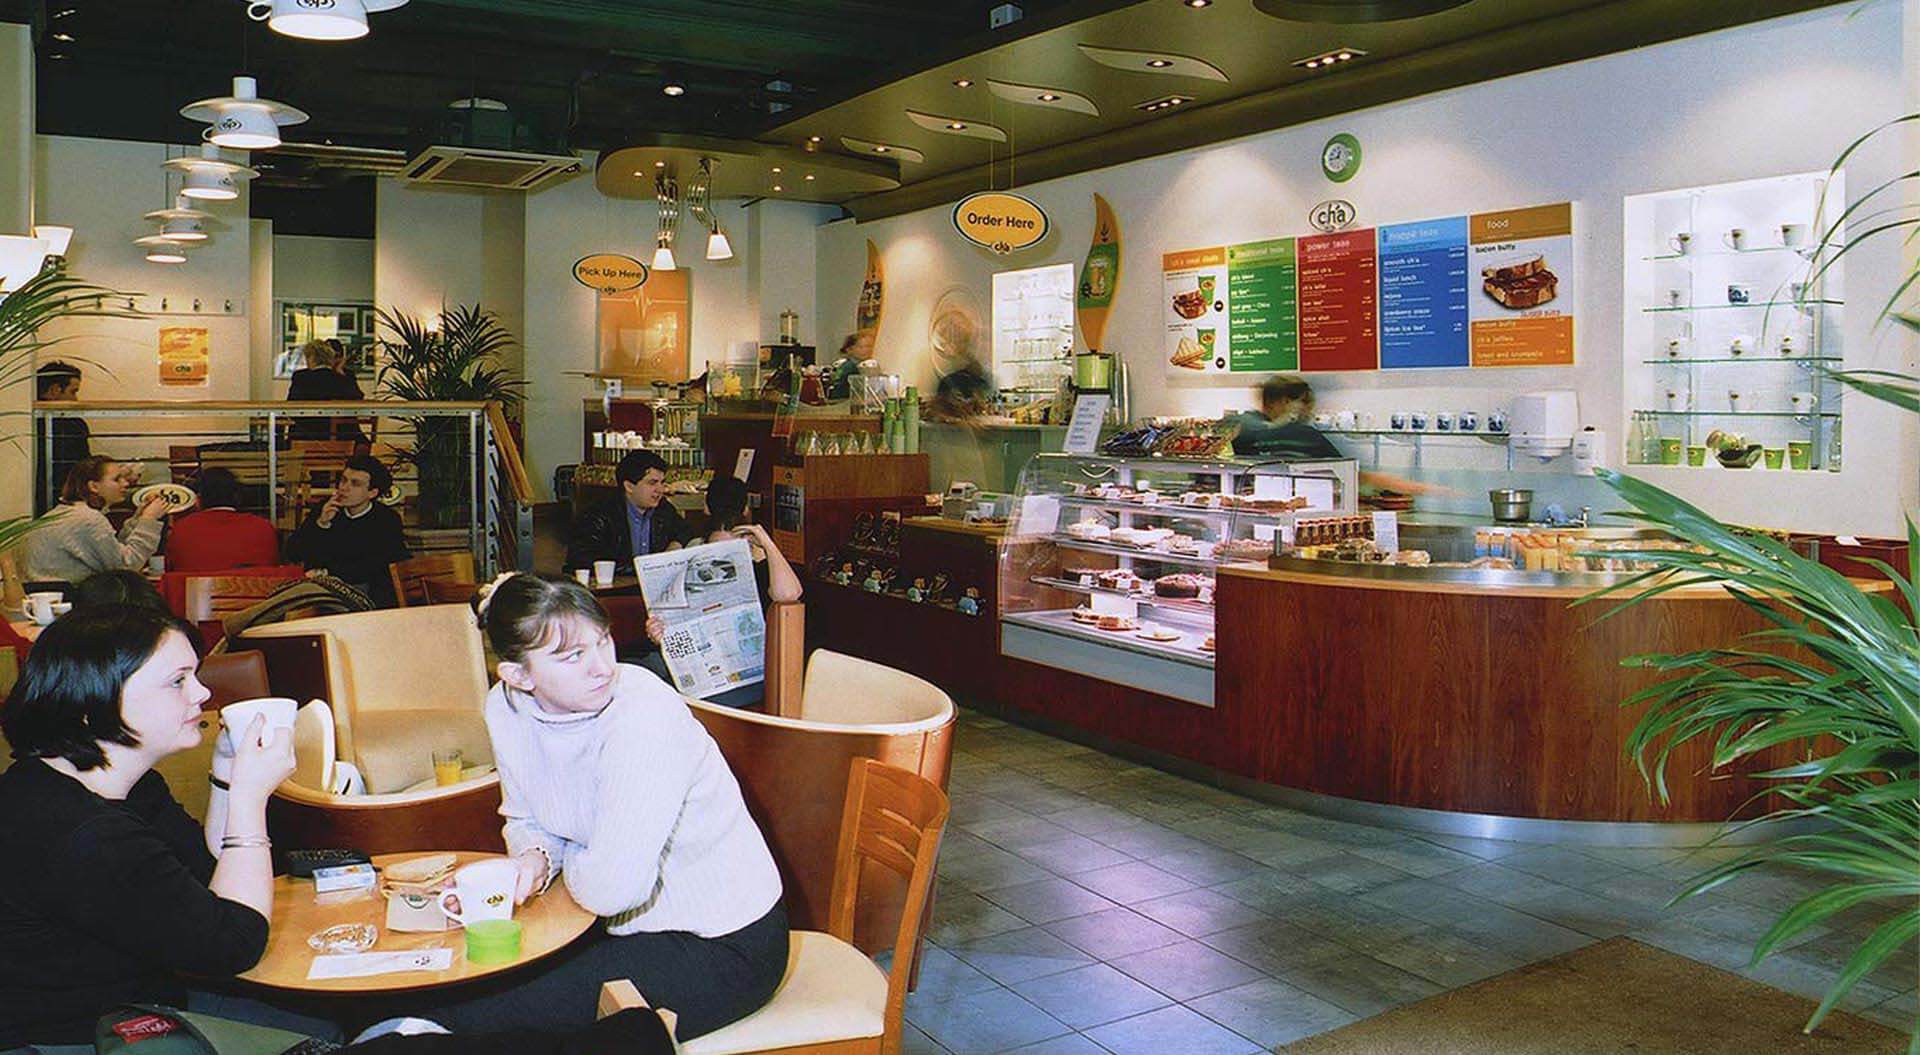 Cha Teahouse café  seating area and serve over counter interior design and branding